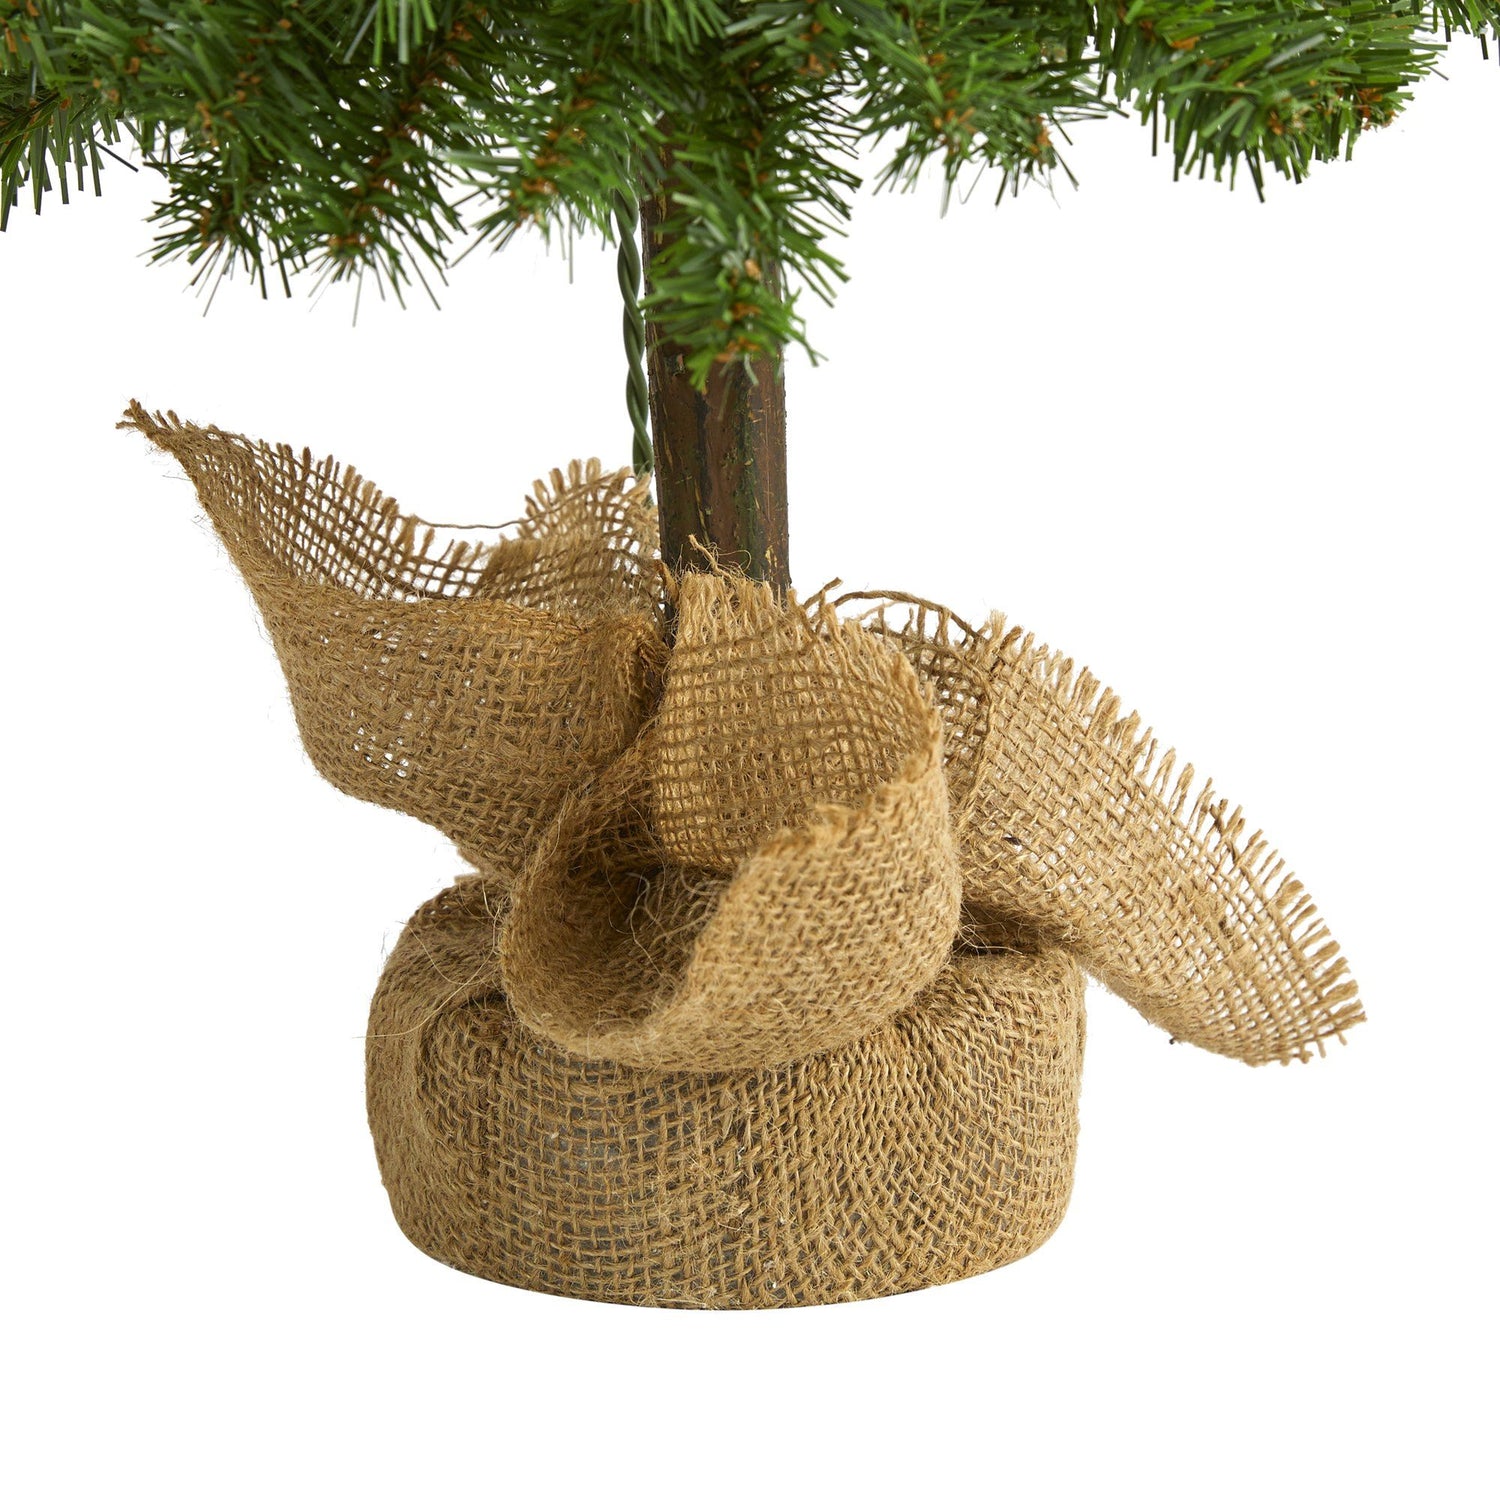 3' Alpine Artificial Christmas Tree with 50 Lights, 177 Bendable Branches and a Burlap Planter